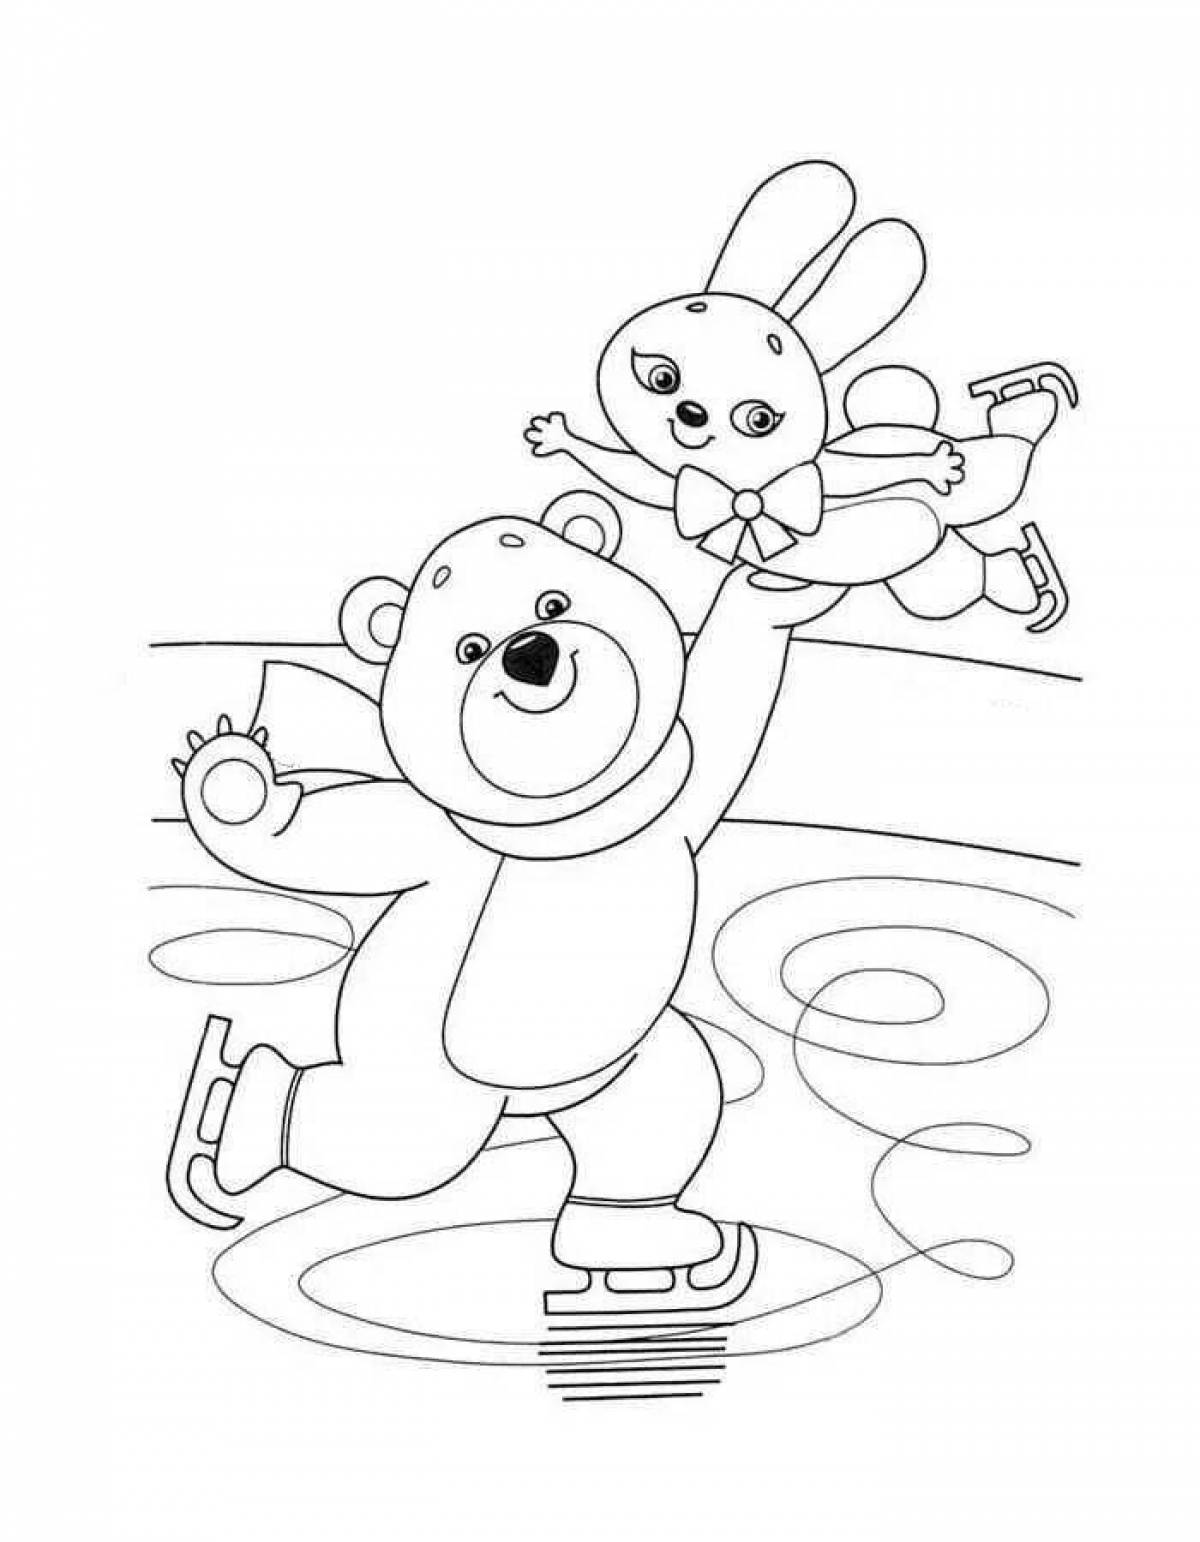 Sparkling winter sports coloring book